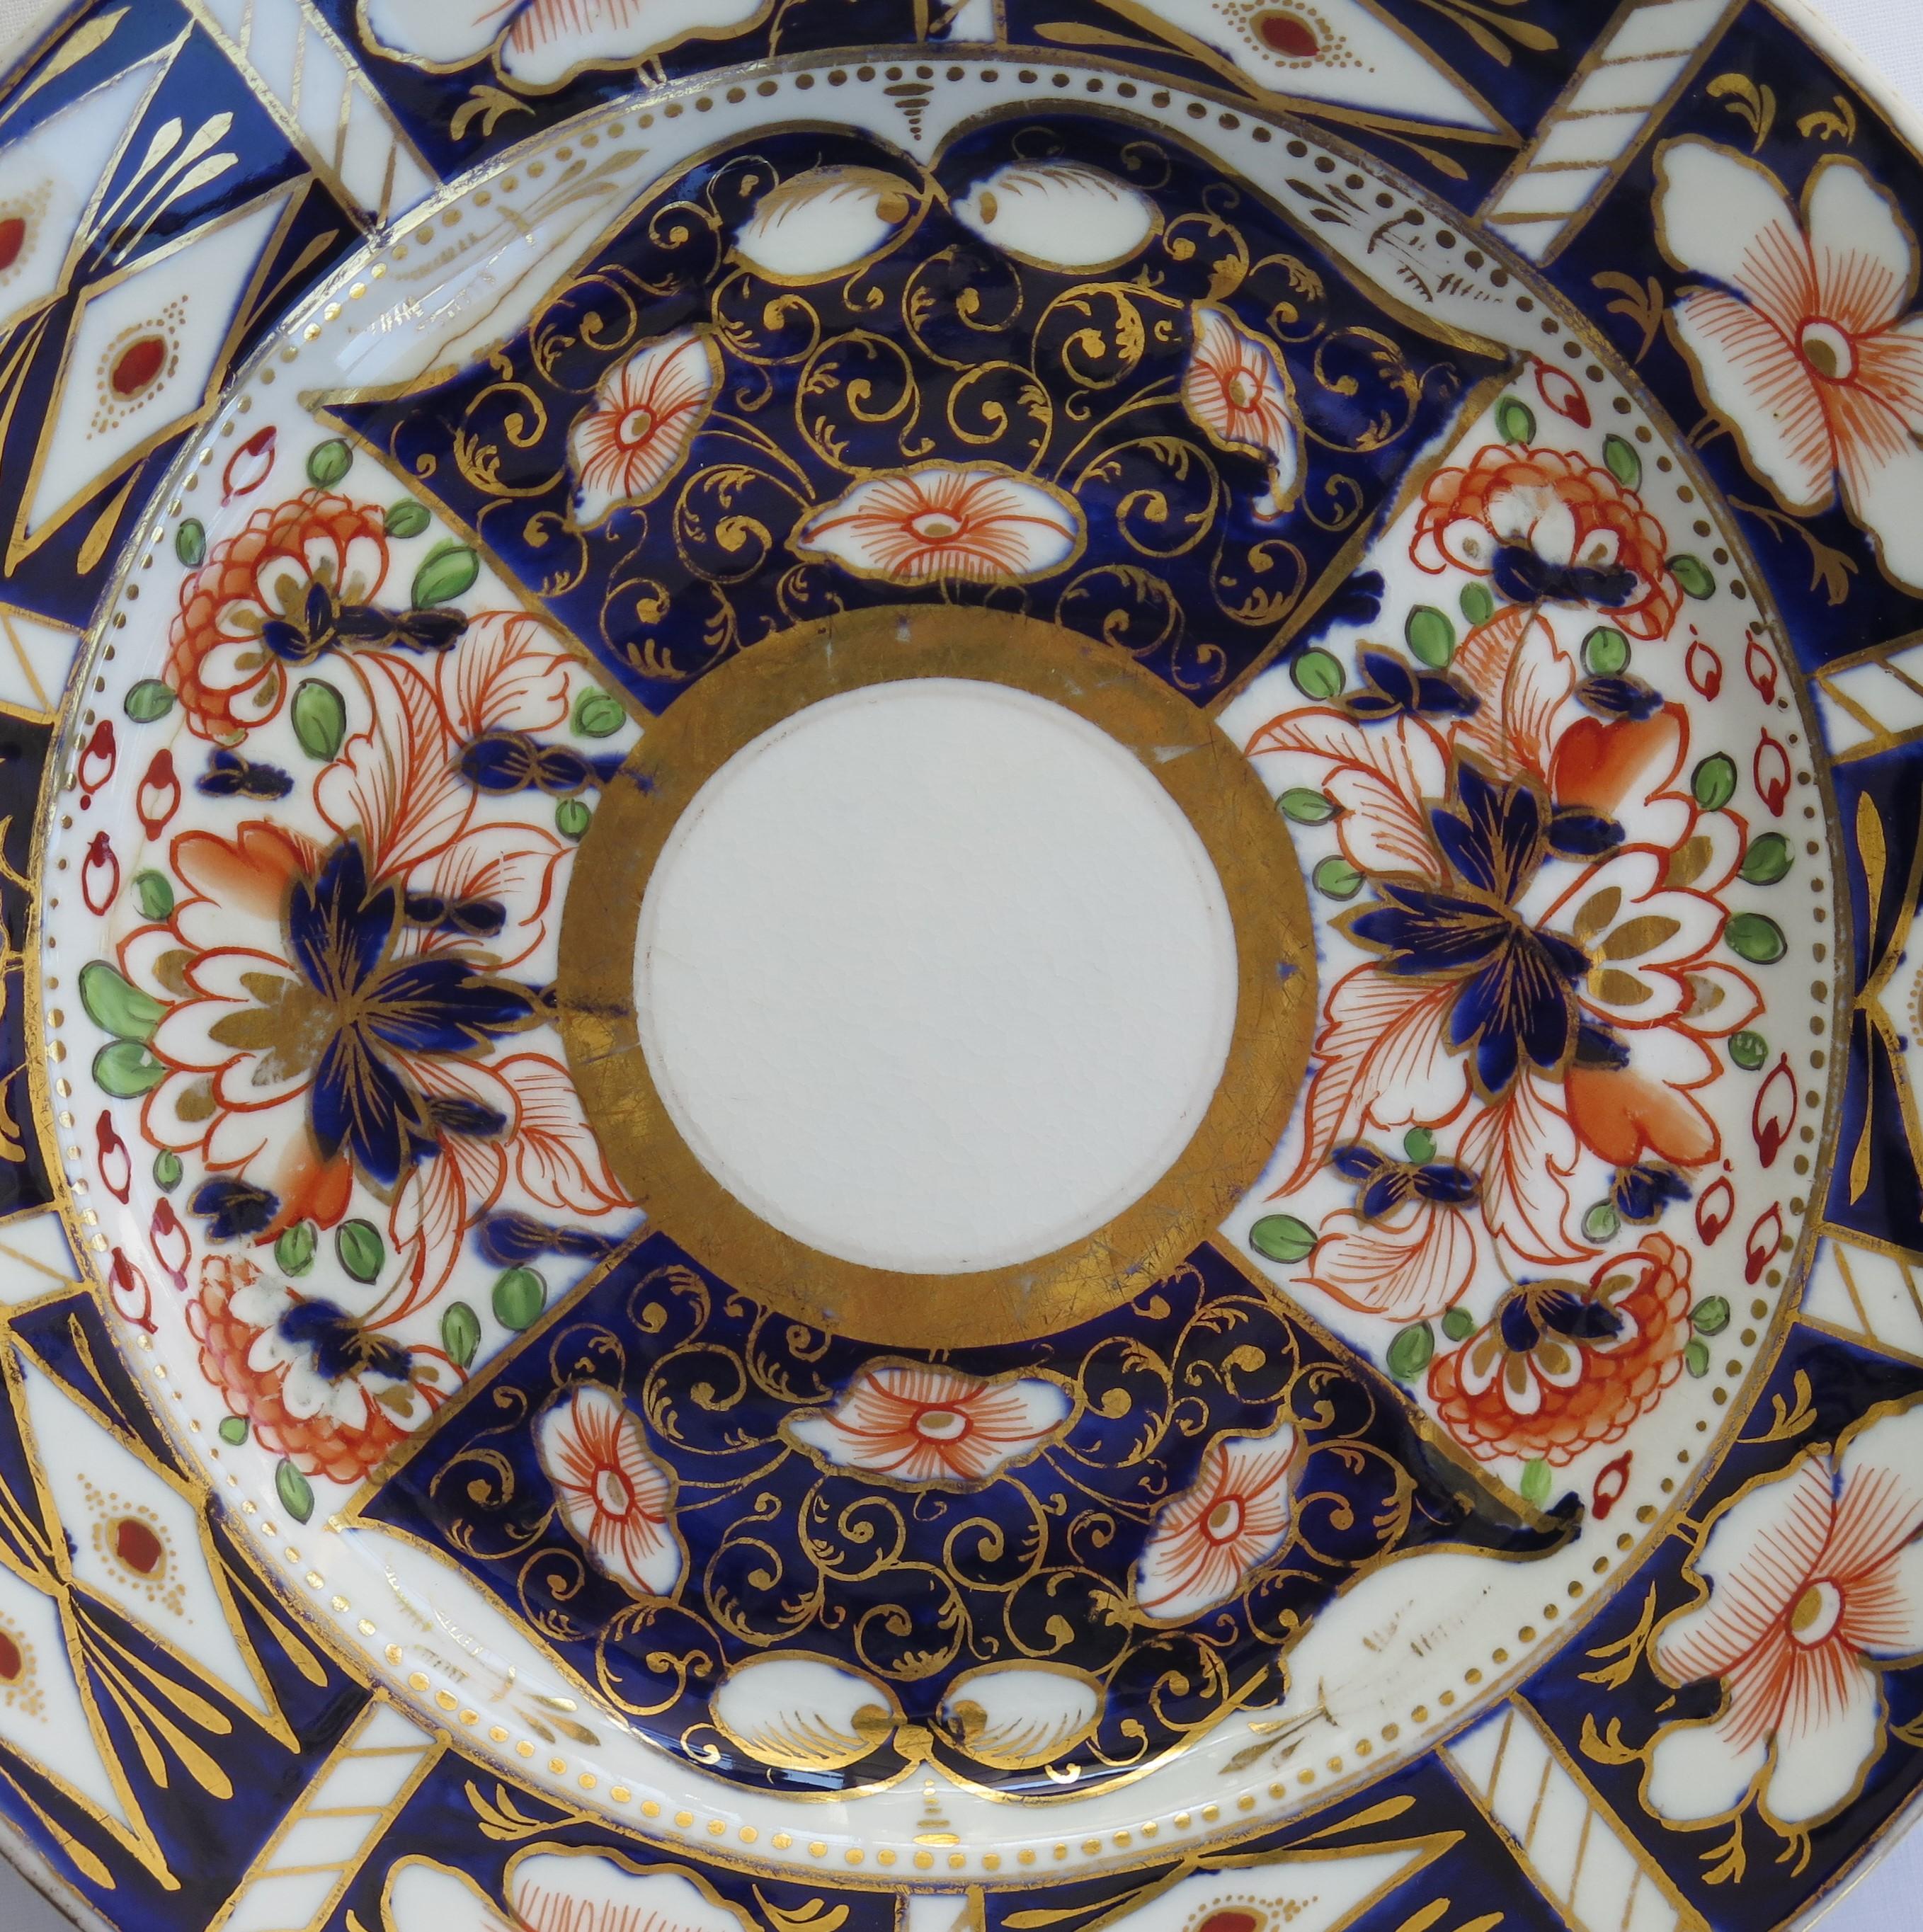 SIX Davenport Porcelain Plates Hand Painted and Gilded Pattern, Circa 1870 For Sale 9